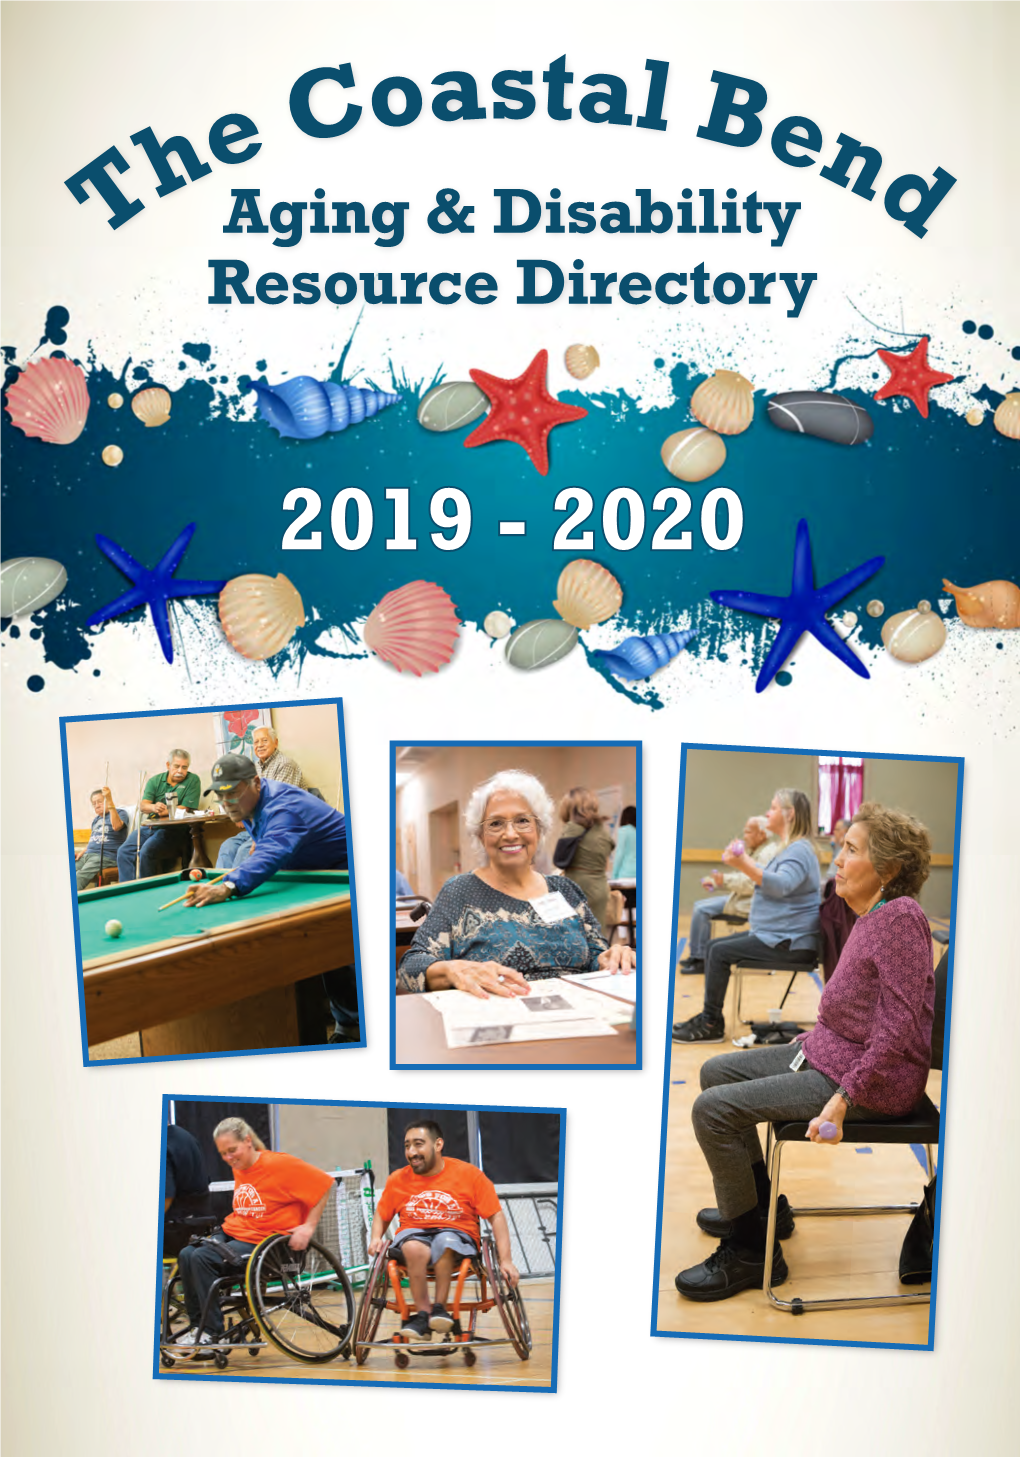 Aging and Disability Resource Directory Committee This Publication Is Brought to You by the Aging and Disability Resource Directory Committee